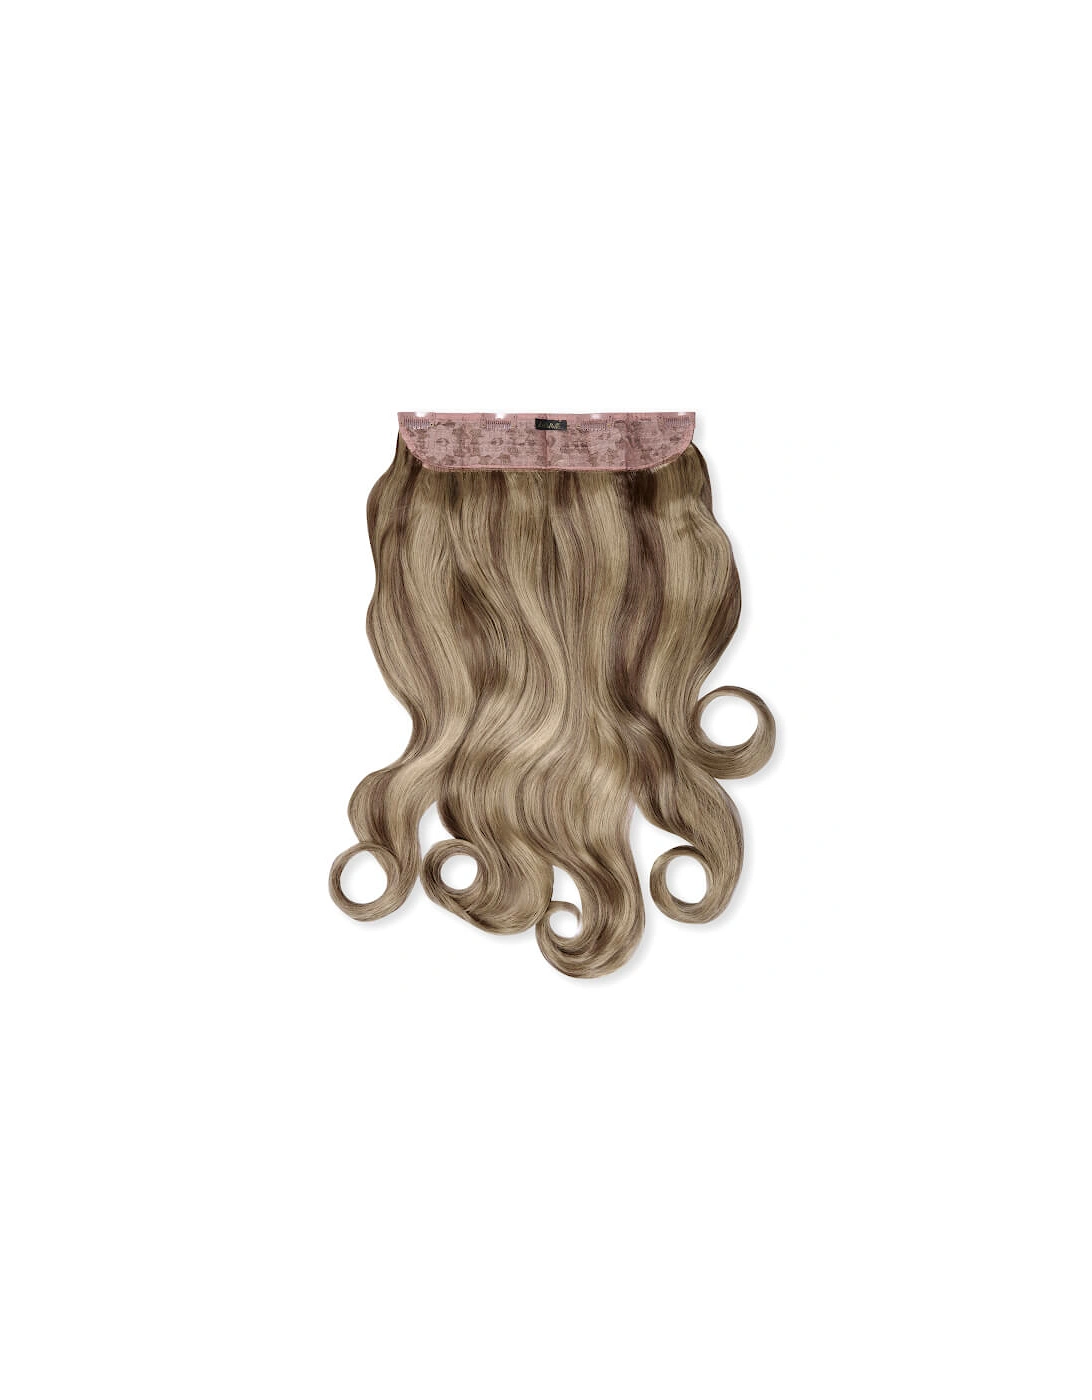 Thick 20 1-Piece Curly Clip in Hair Extensions - Chestnut